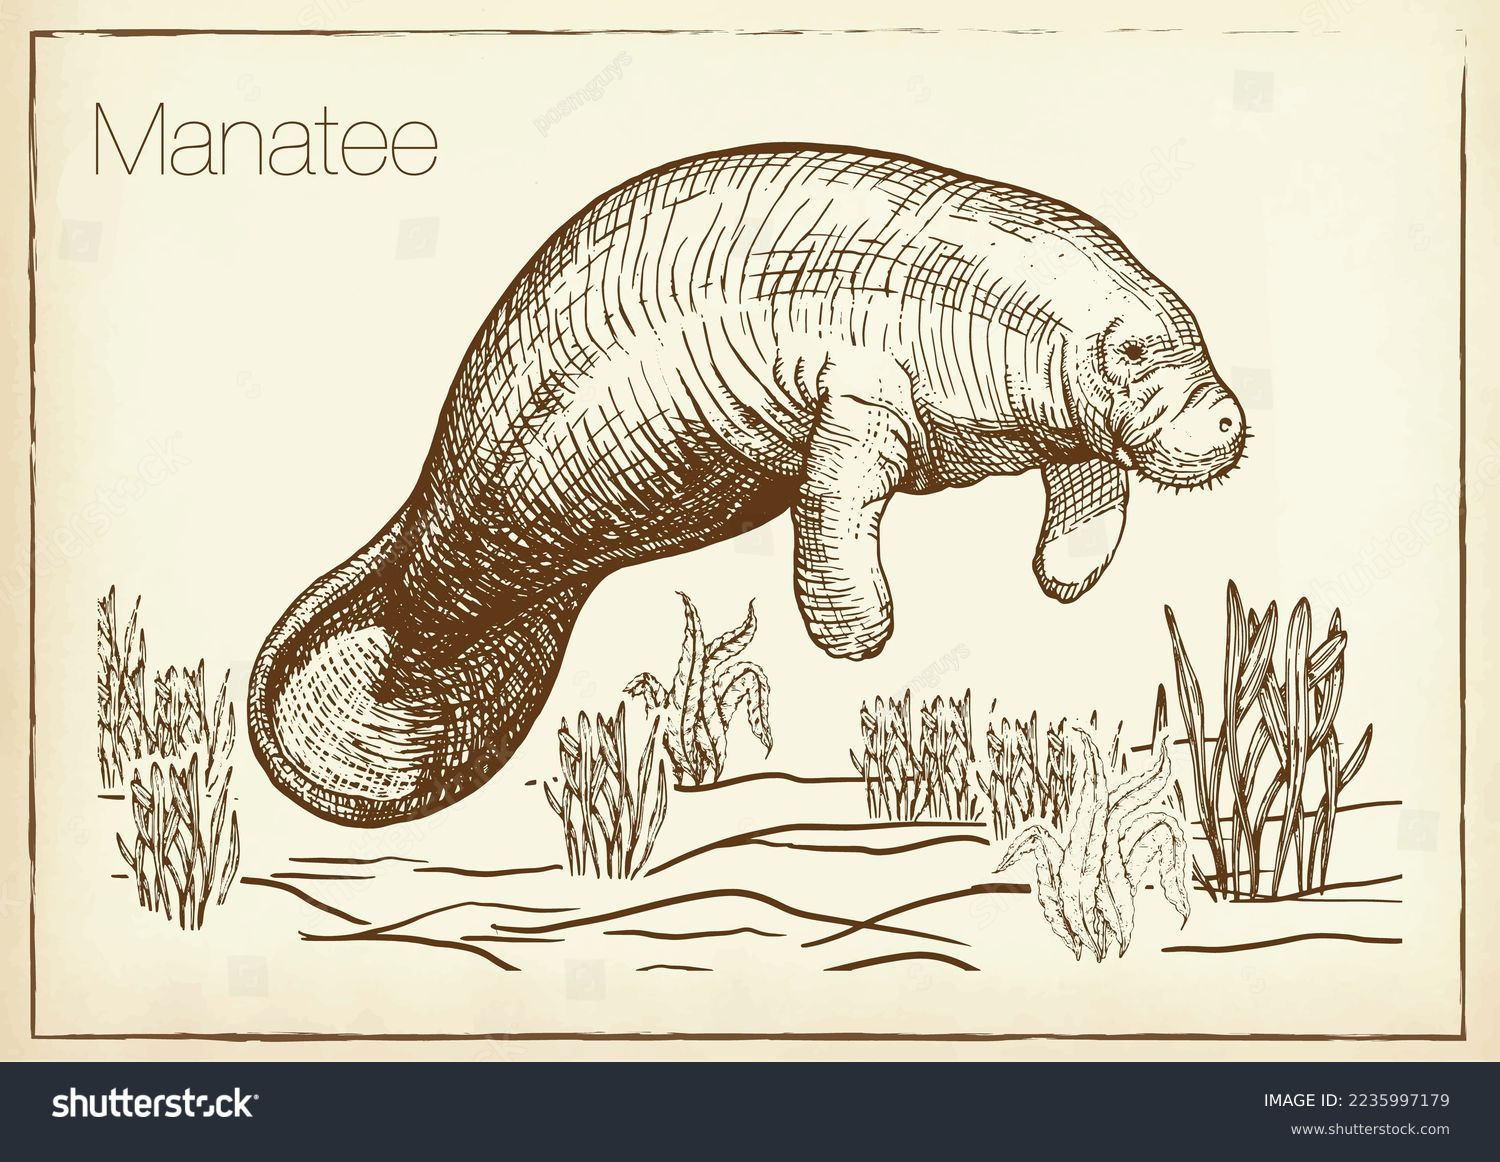 SVG of Manatee water animal sketch vector illustration. Manatee or sea cow. Hand drawn.  svg